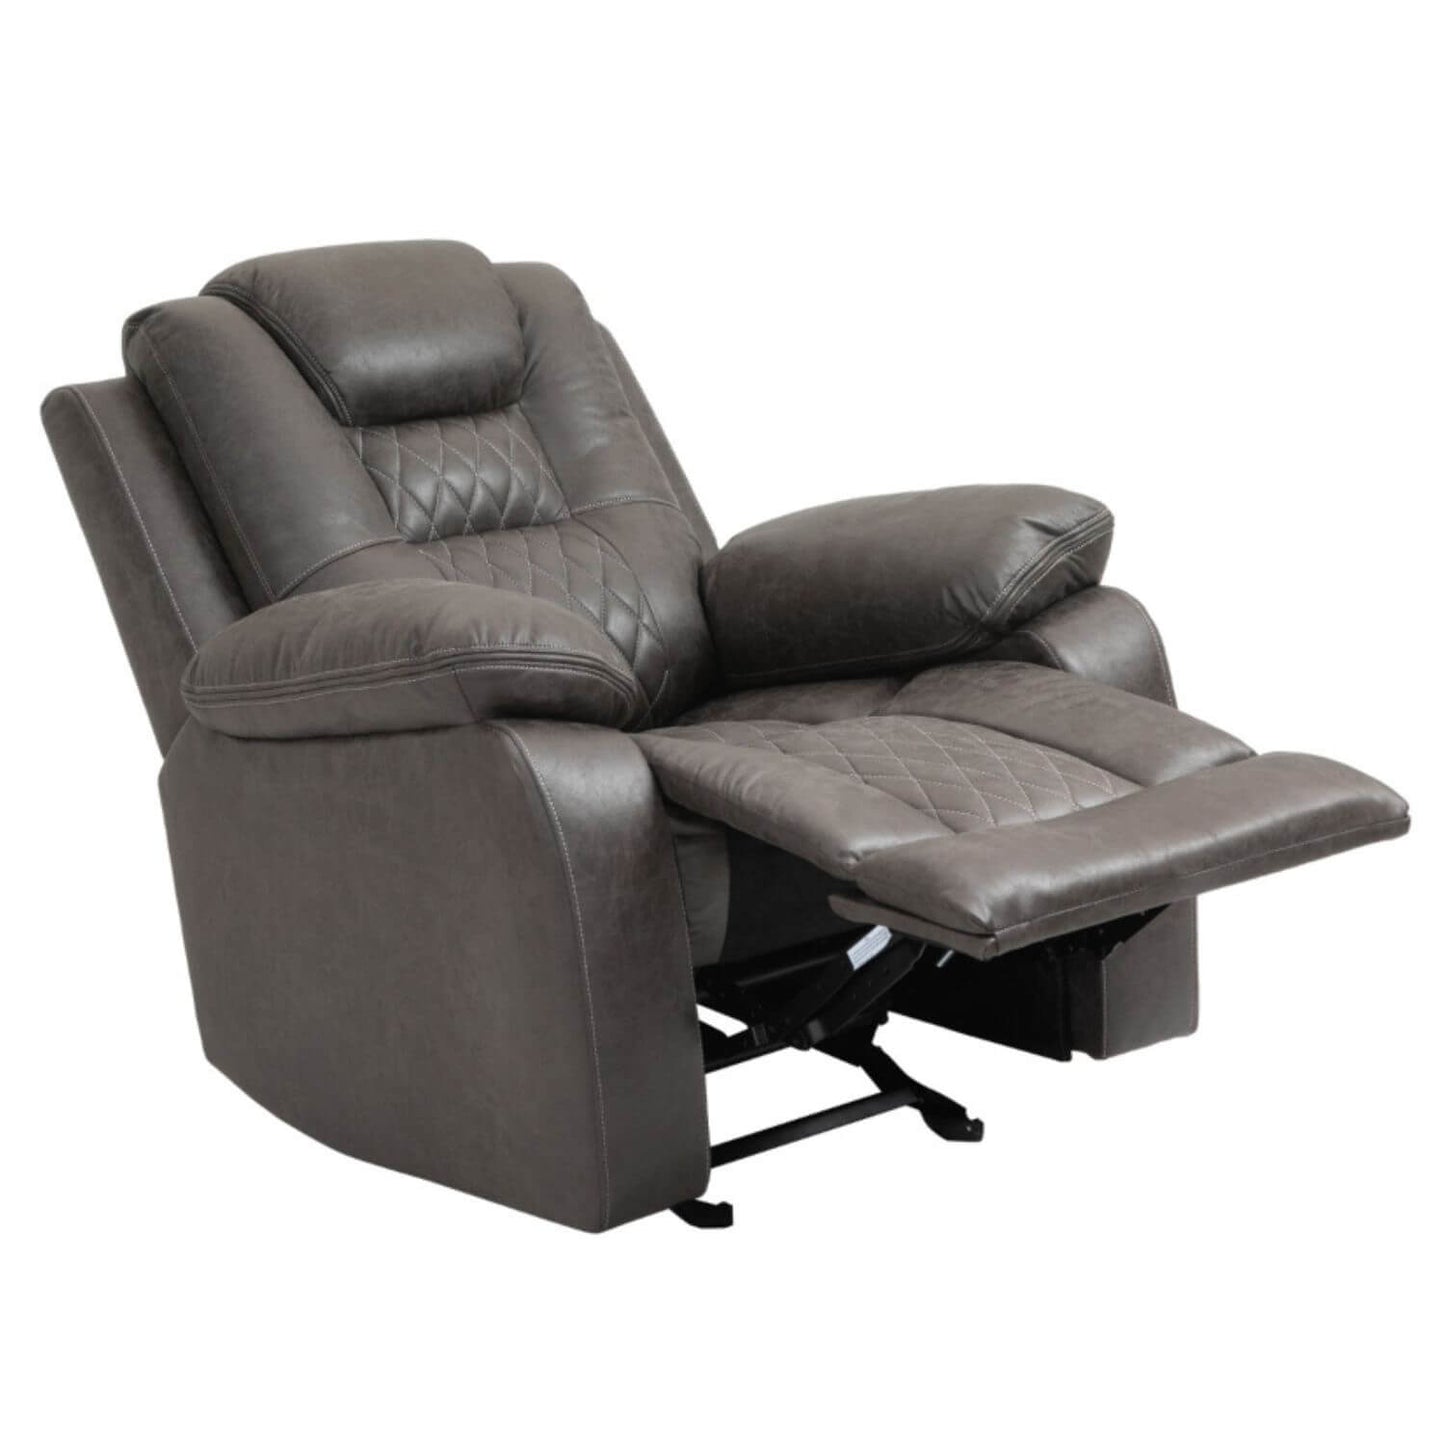 HOMCOM 2-IN-1 Nursery Glider Rocker Recliner, Manual Recliner with Pull-Out Ring, Brown